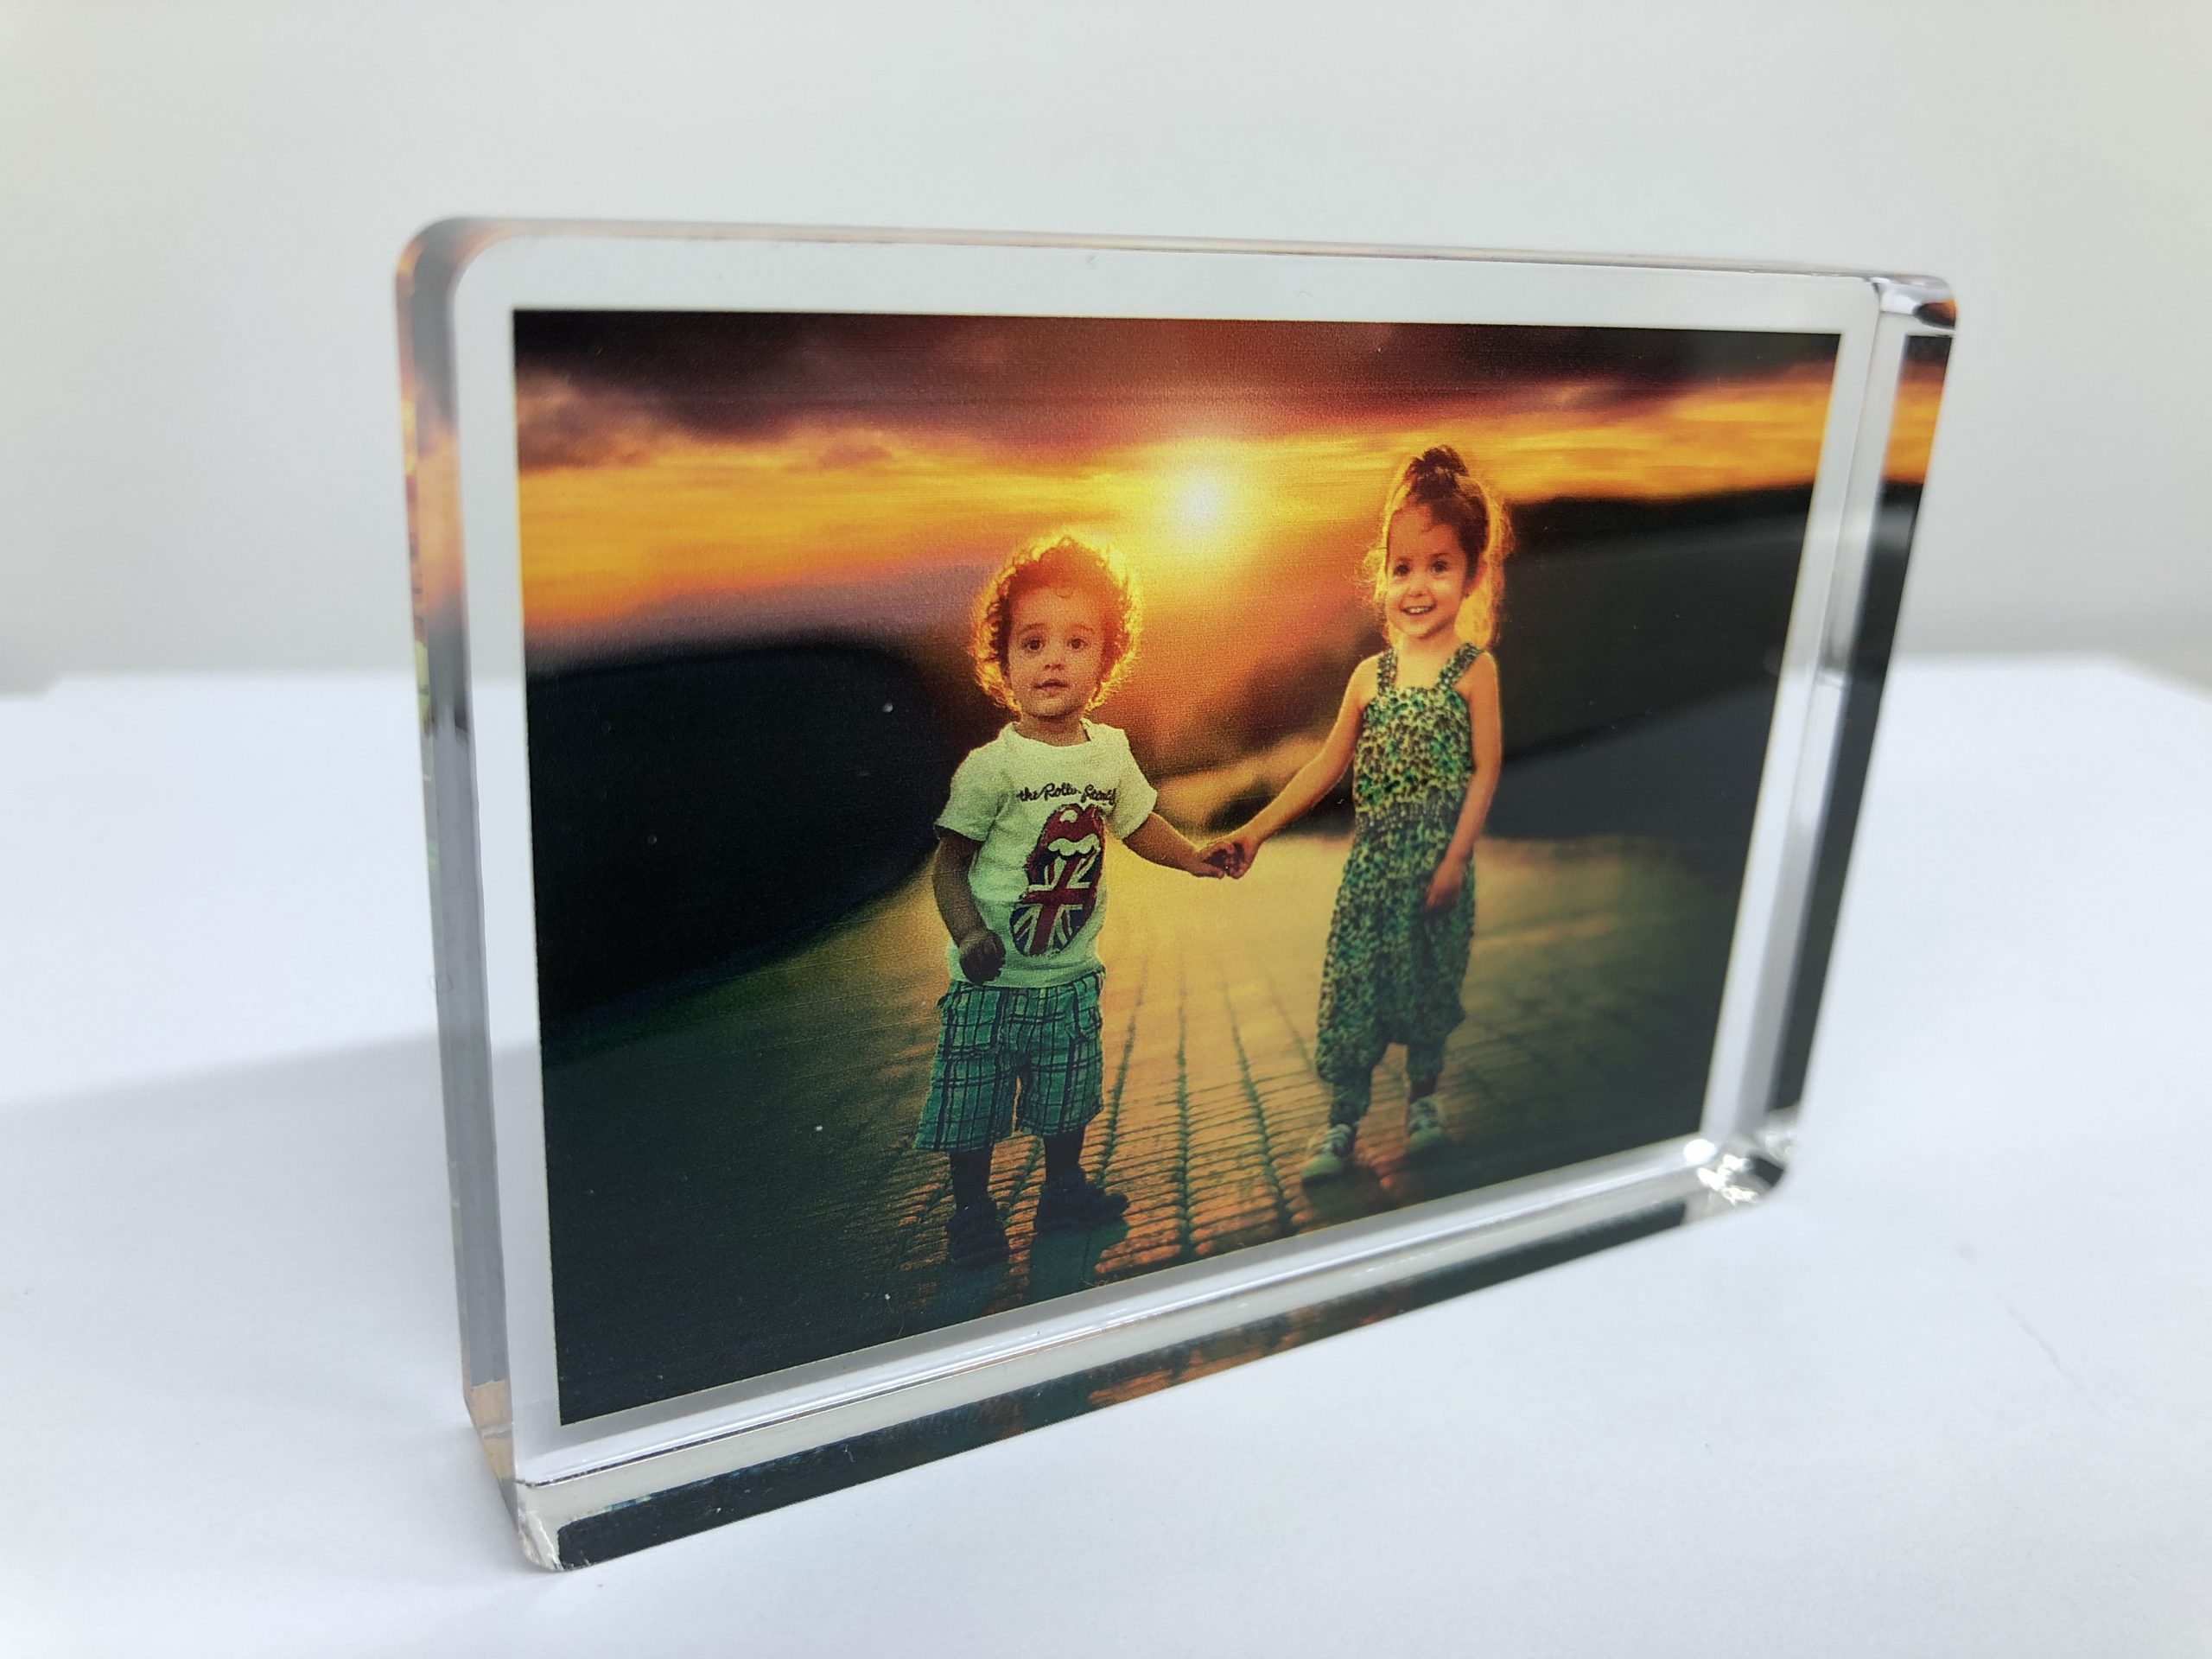 PHOTO BLOCK - Personalised Photo Block - 88x63 Playing Card Size - Your Image